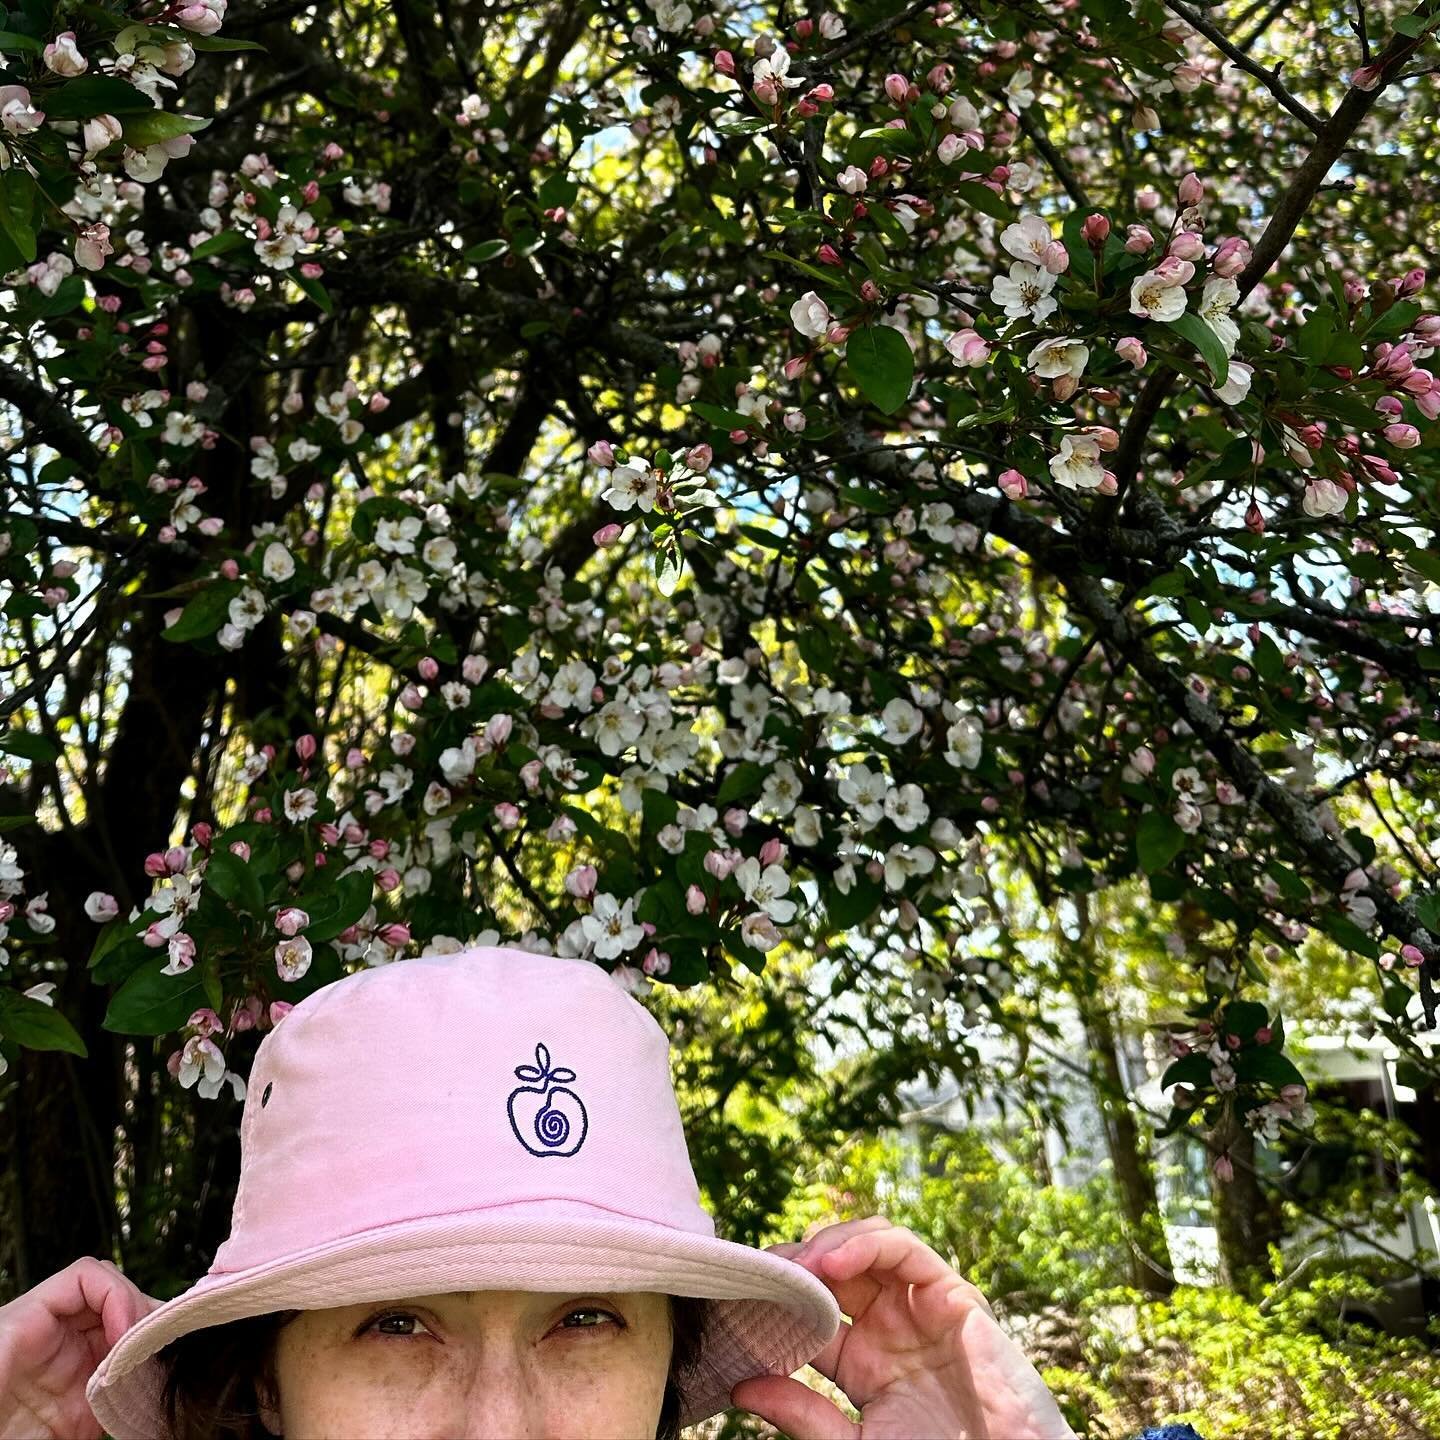 💕🌸 pink bucket hats available now 🎀🩷

limited run
100% cotton
one size fits most 

visit my site (link in bio) to purchase! 🌷